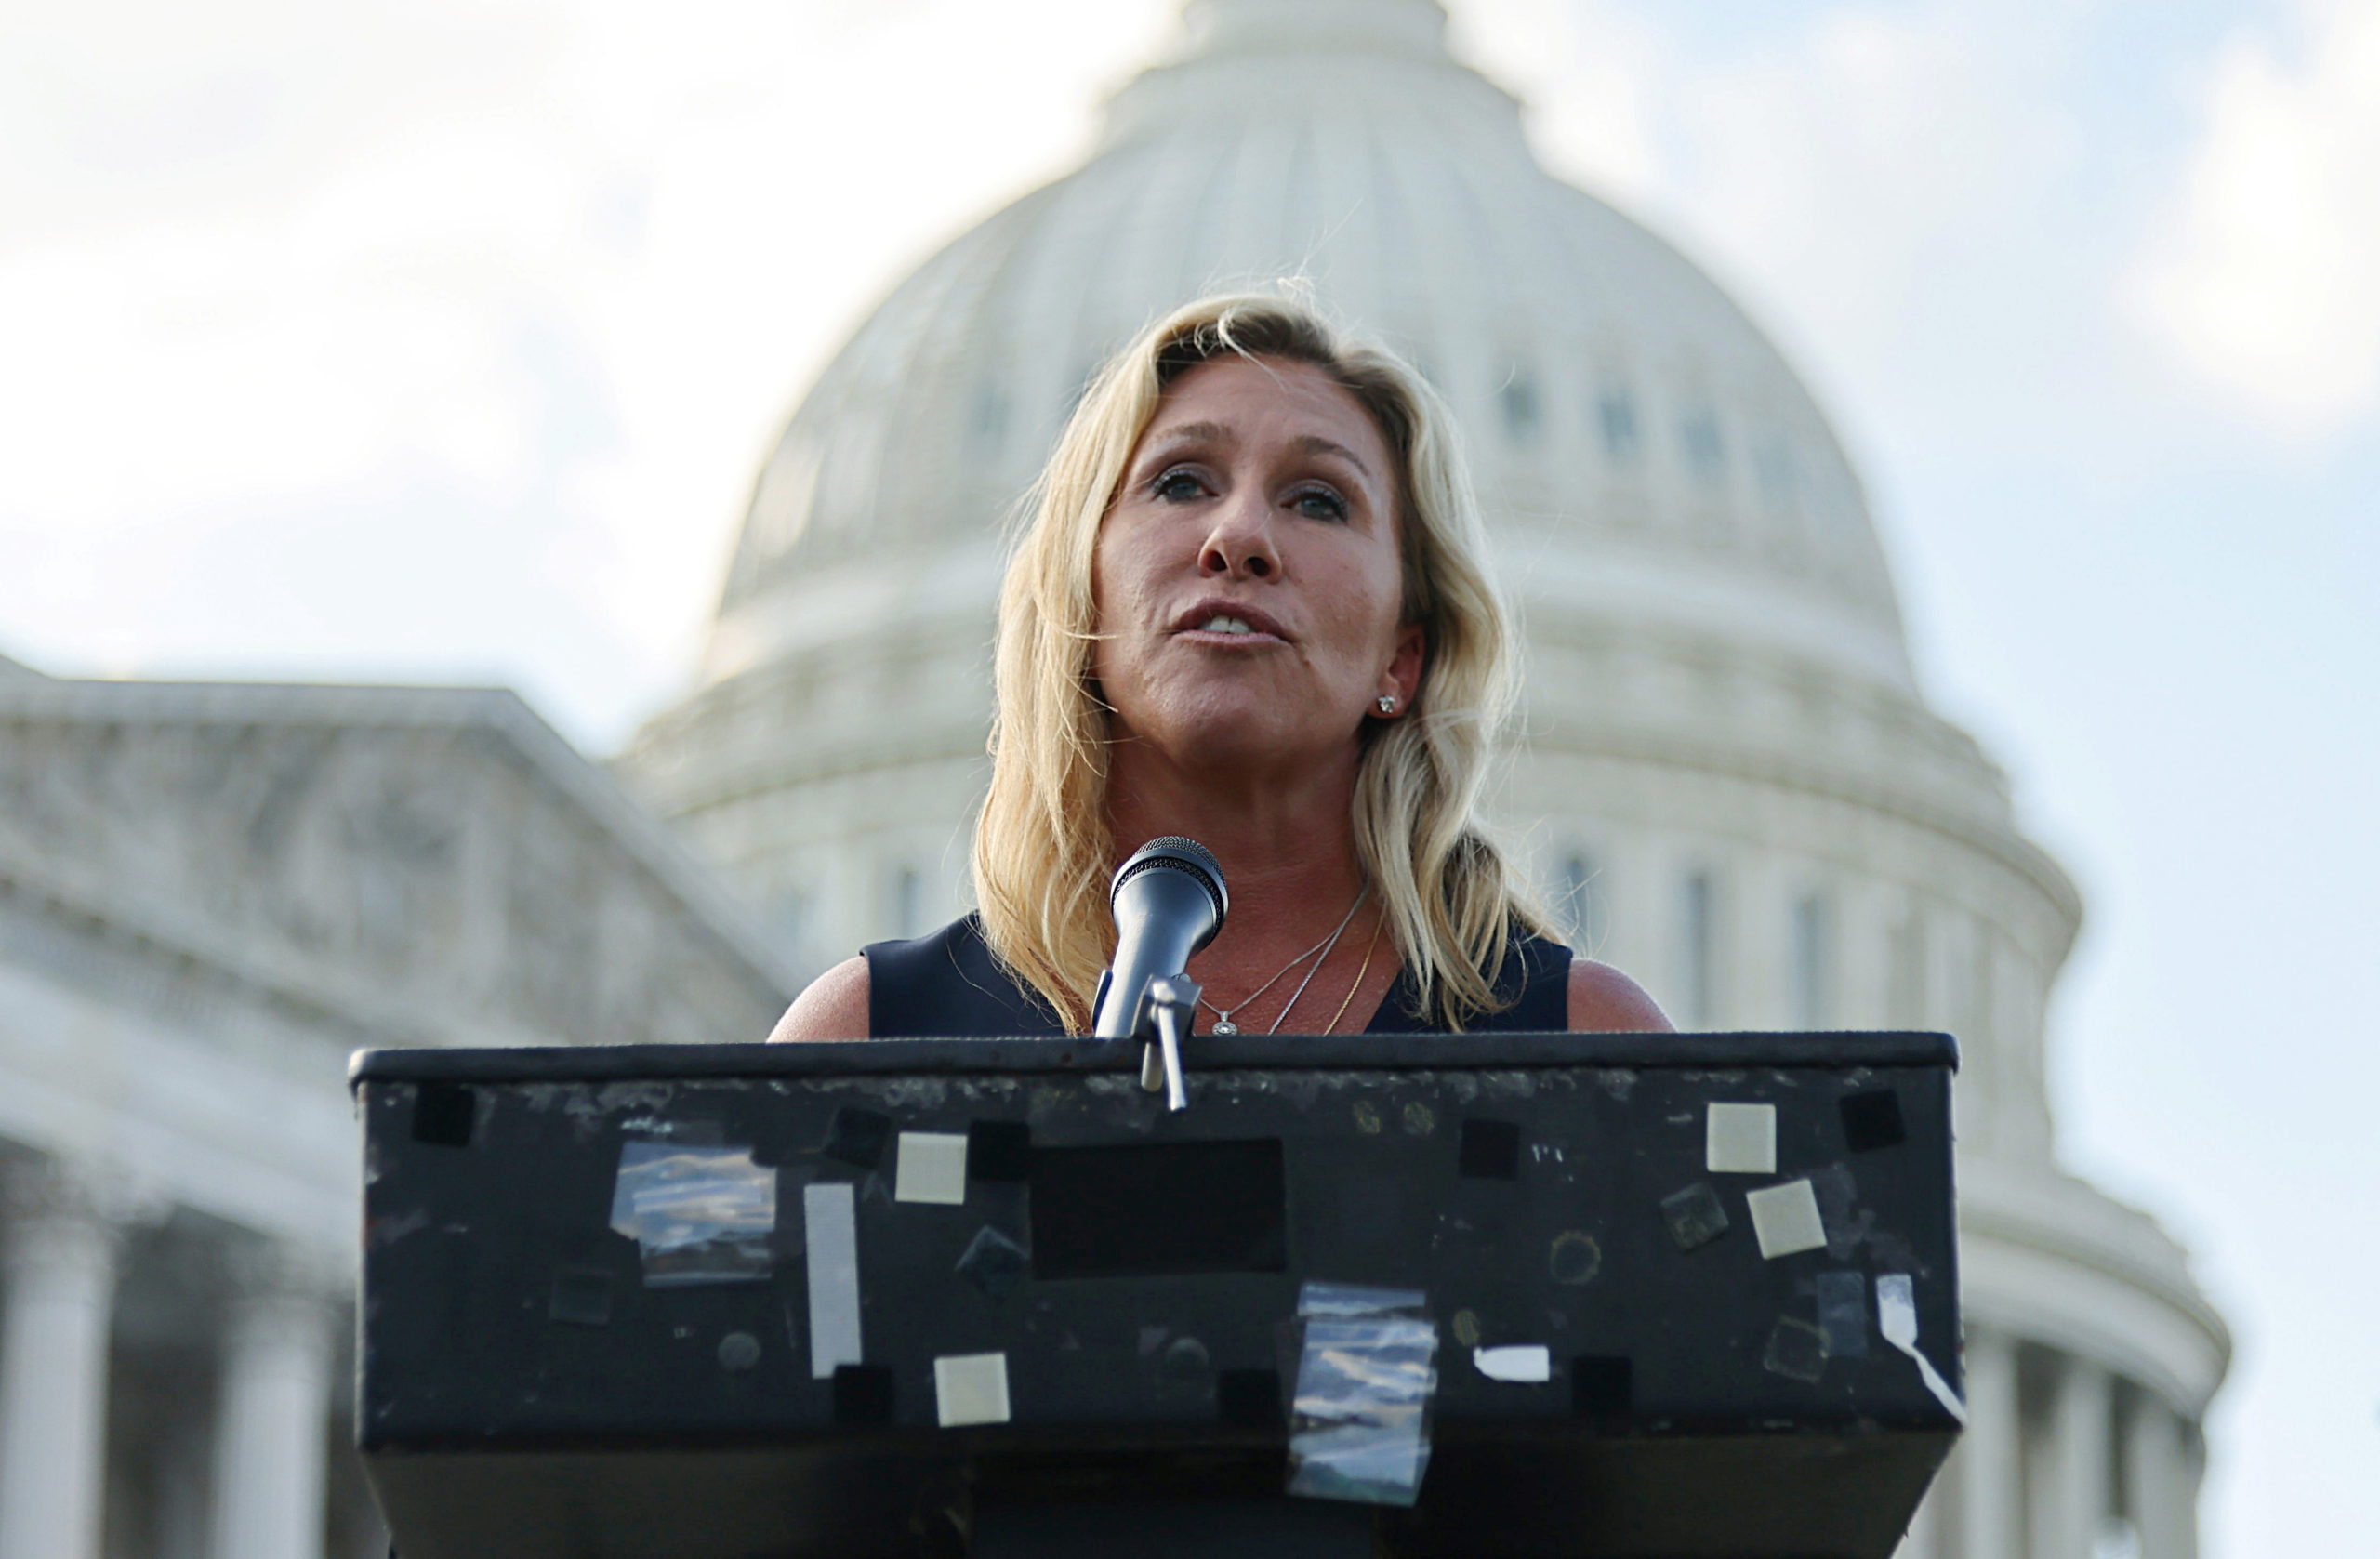 Representative Marjorie Taylor Greene (R-GA) holds a press conference outside the U.S. Capitol following a private visit to the Holocaust Museum, to express contrition for previous remarks about Jewish people, in Washington, U.S. June 14, 2021. REUTERS/Evelyn Hockstein